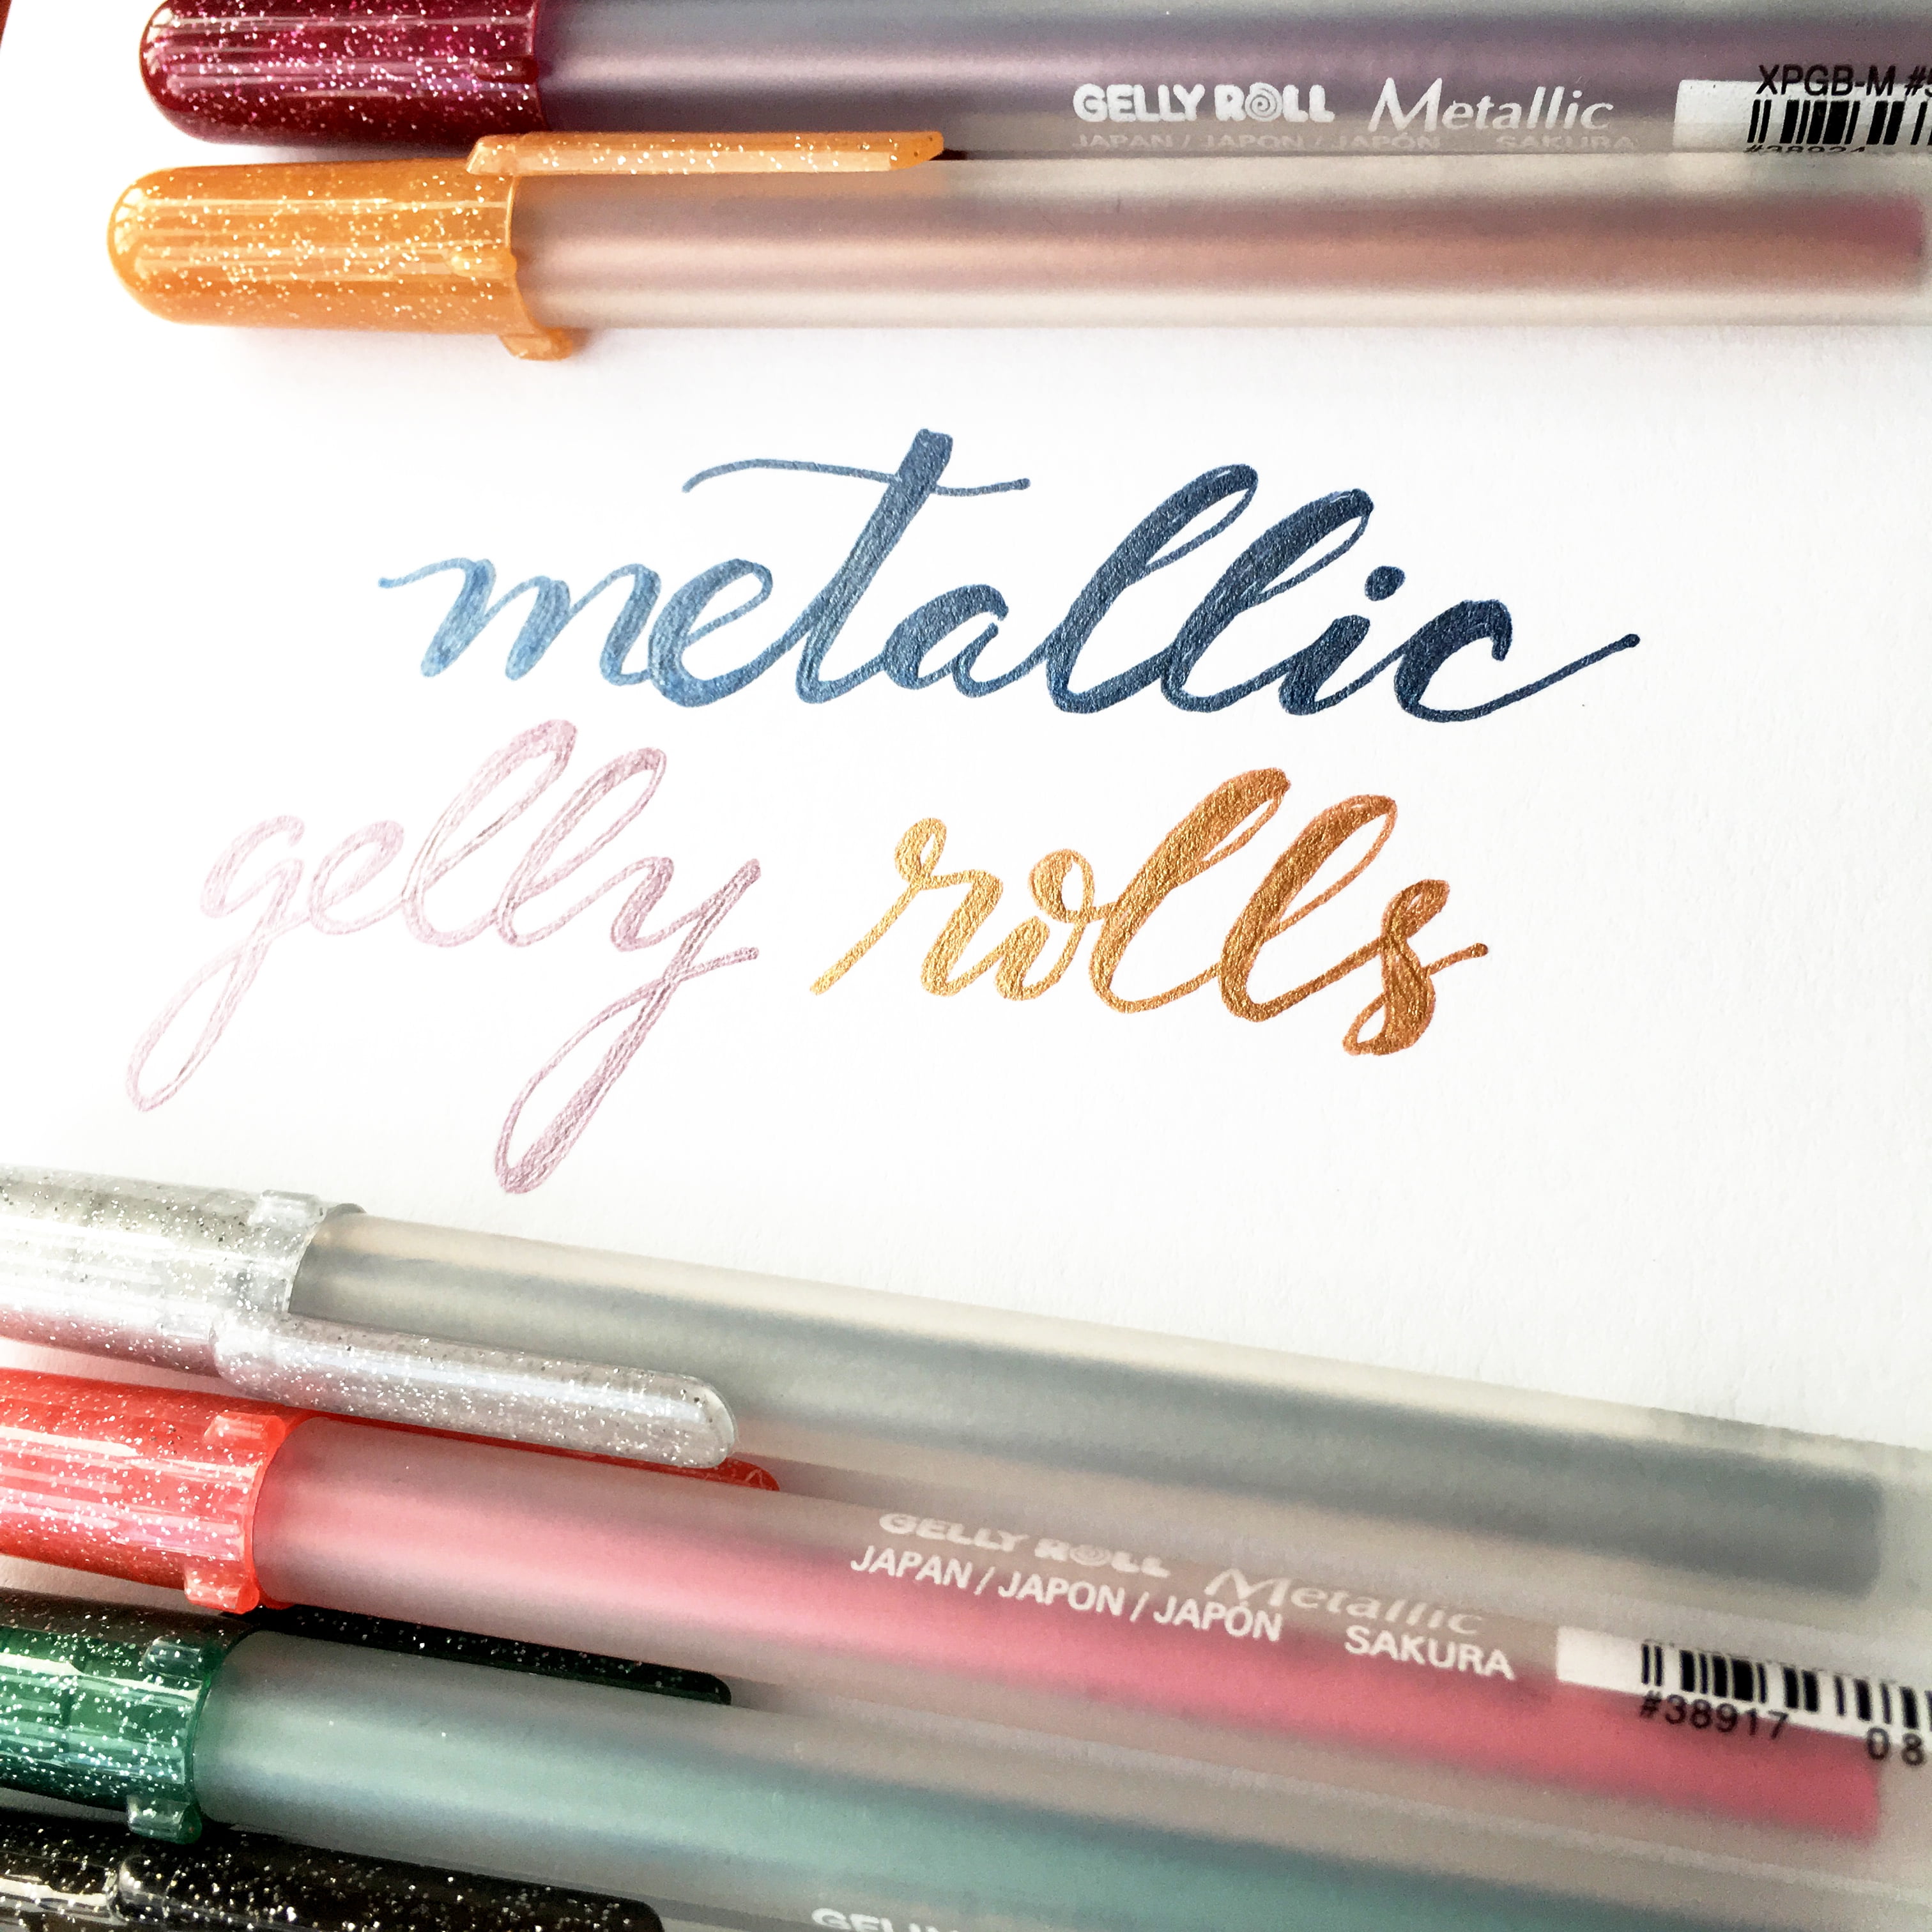 SAKURA Gelly Roll Gel Pens - Medium Point Ink Pen for Journaling, Art, or  Drawing - Assorted Colored Ink - 10 Pack